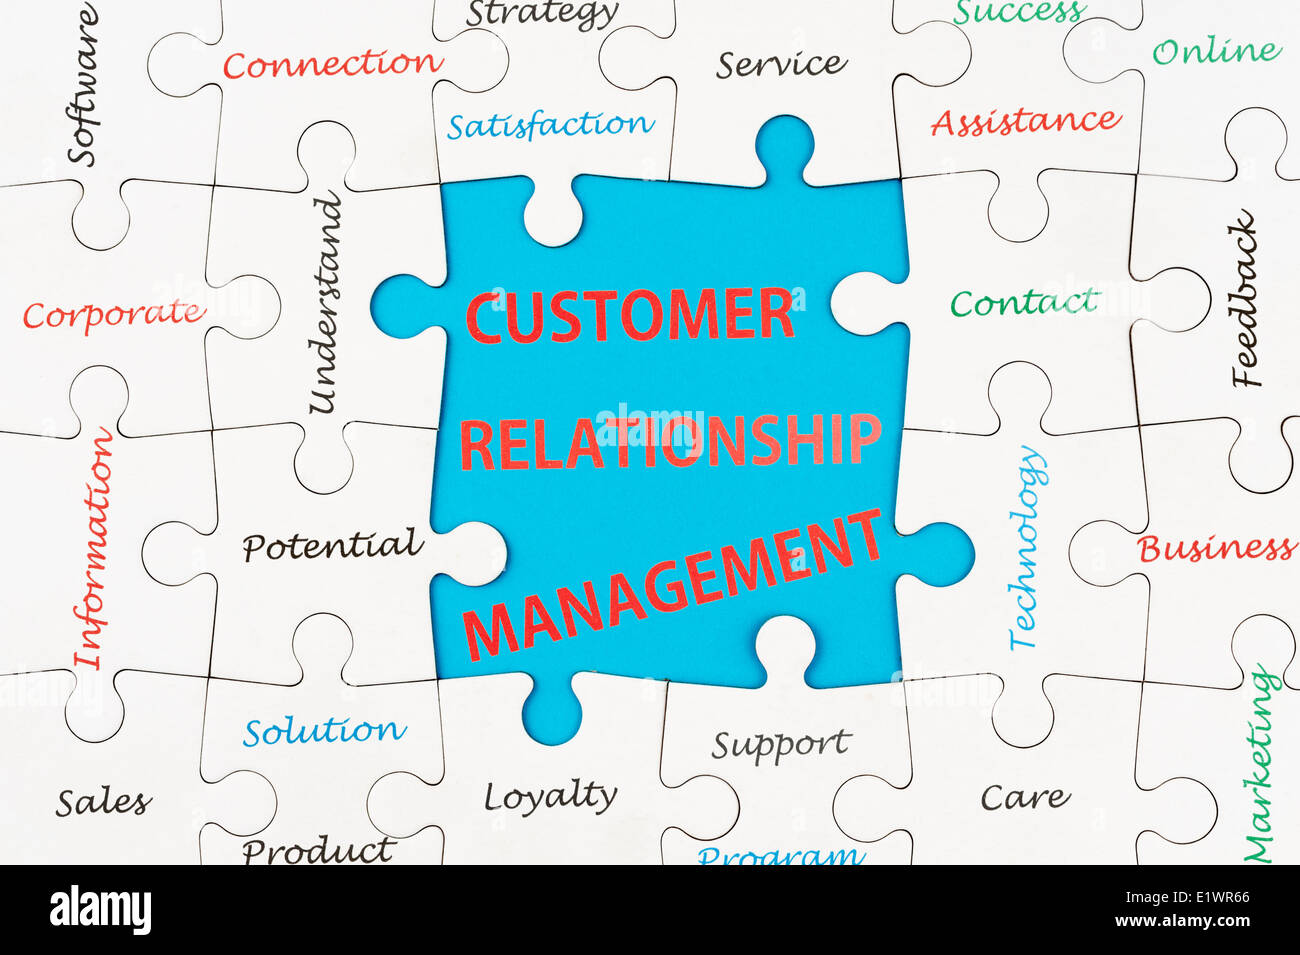 Customer relationship management concept word cloud on group of jigsaw puzzle pieces Stock Photo